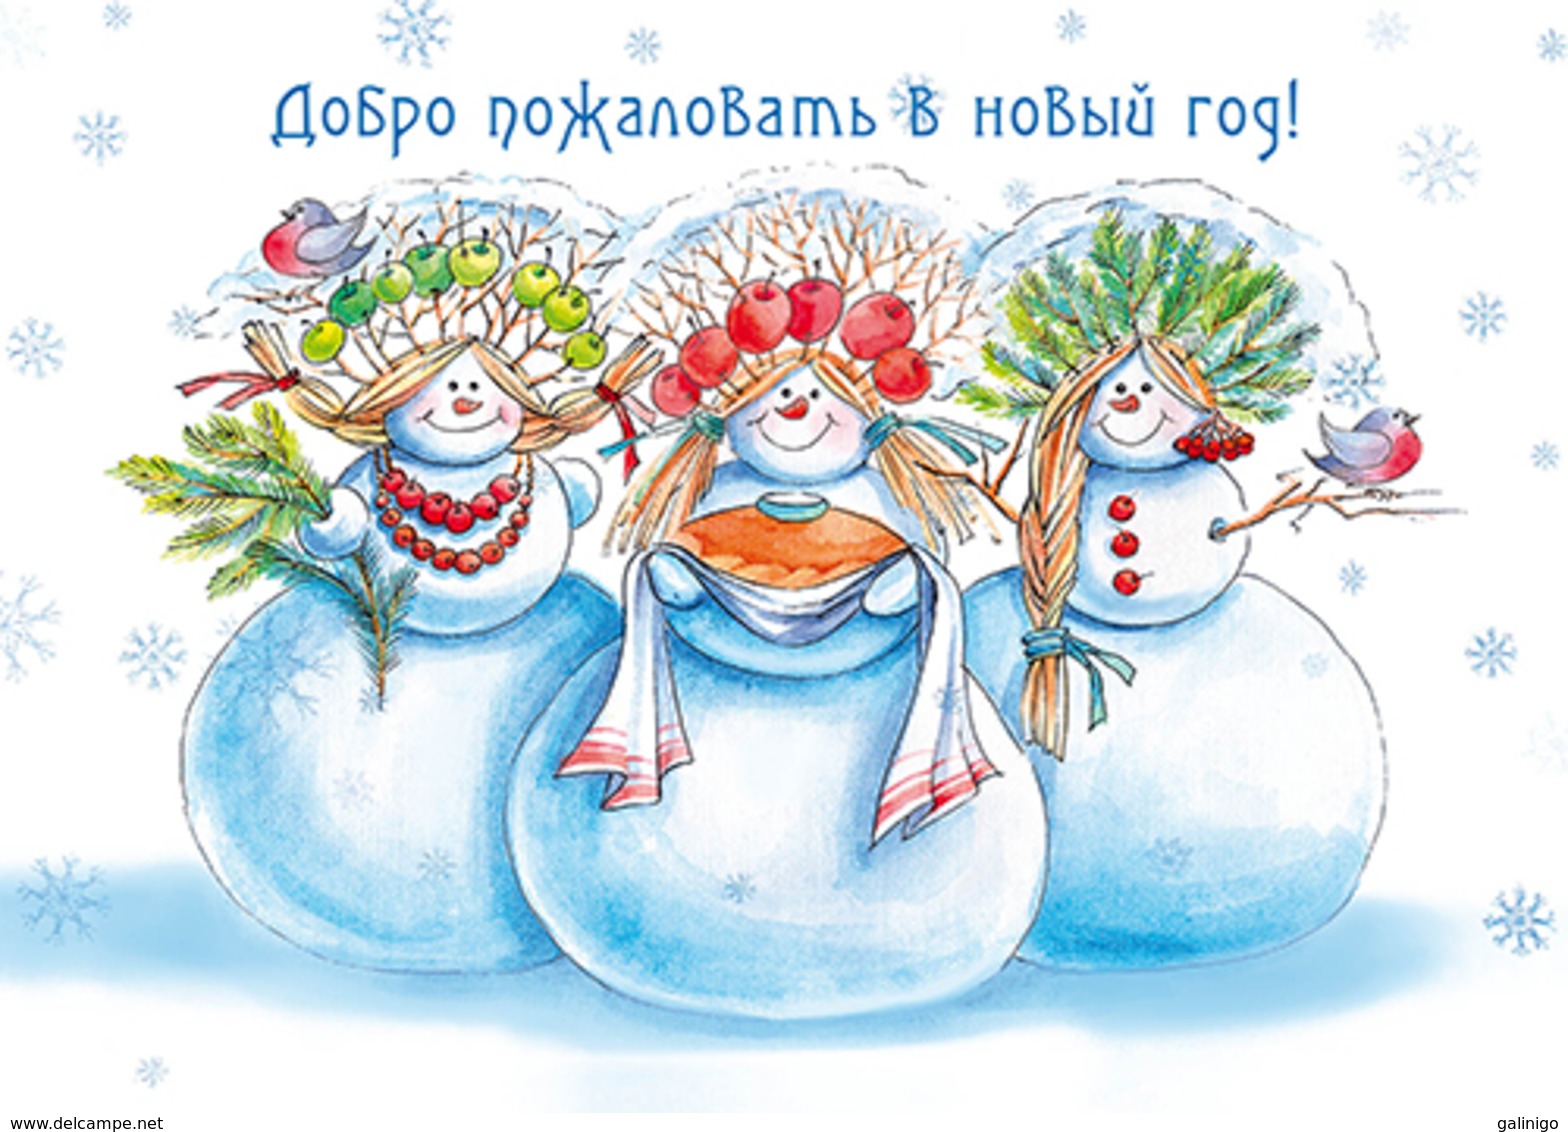 2019-327 Postal Card Without Stamp Russia Welcome To The New Year! Dressed Up Snowmen Greet Guests - Russia